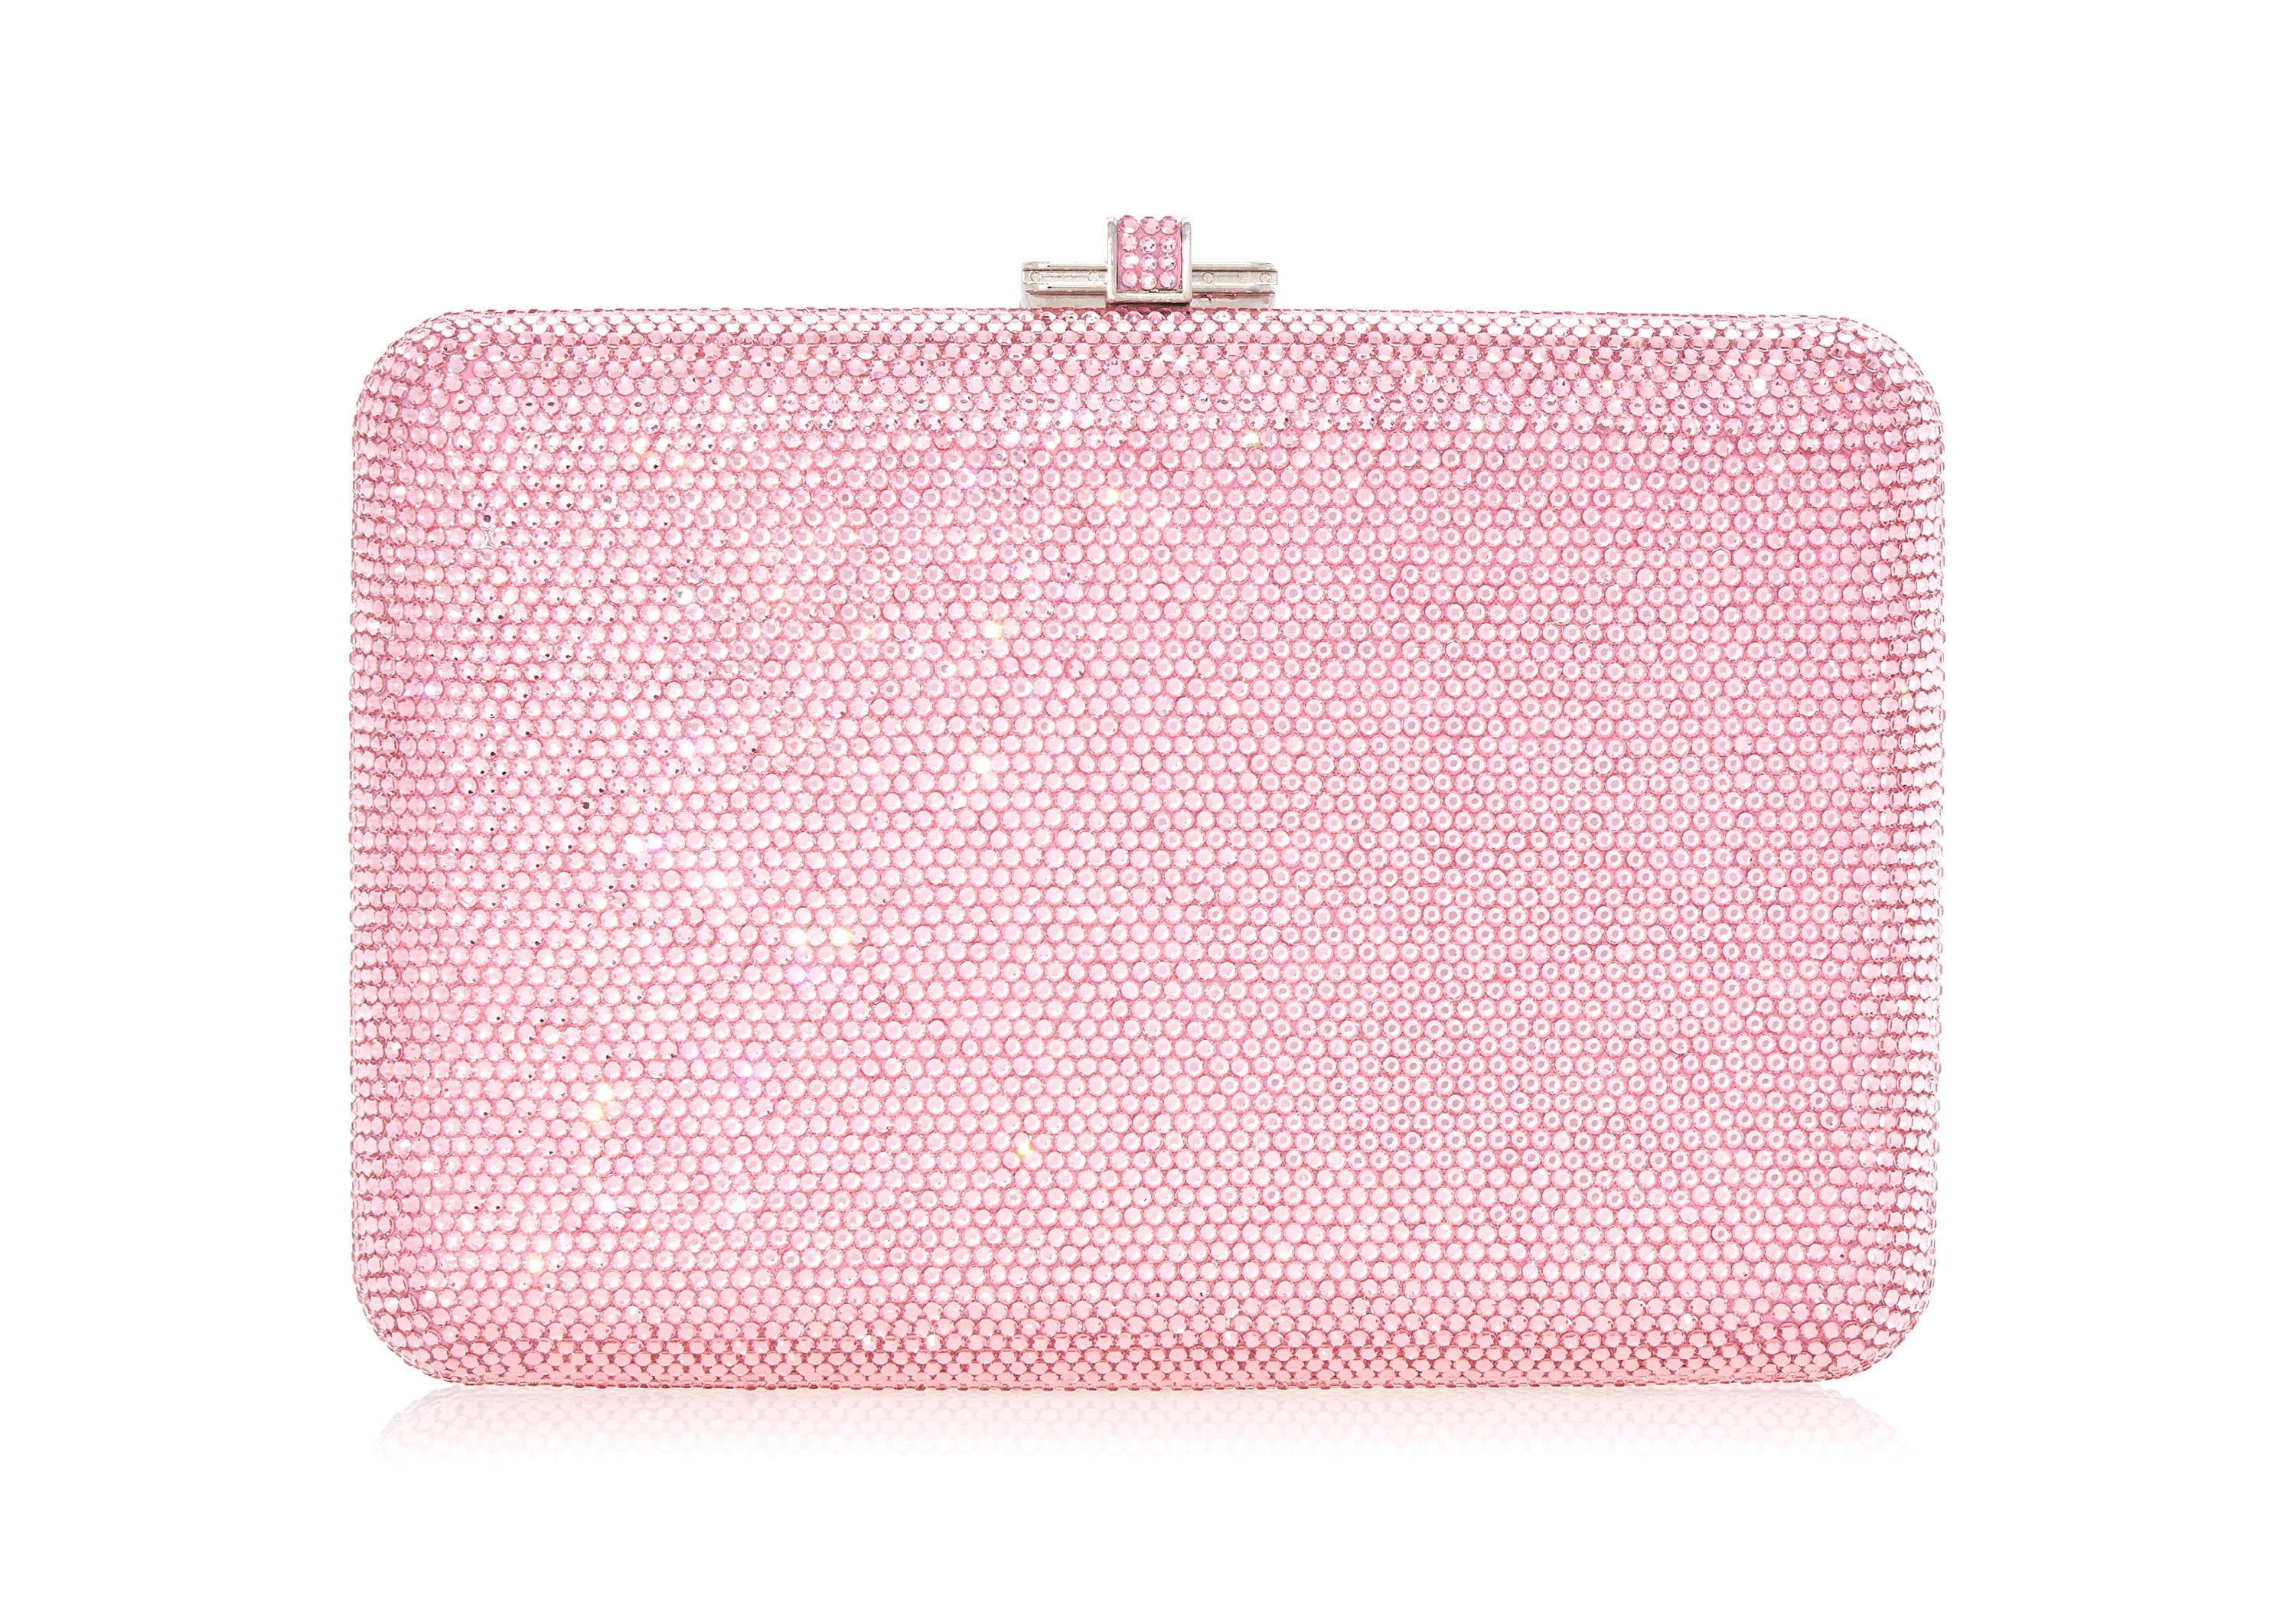 Judith Leiber Covered Clutch Purse